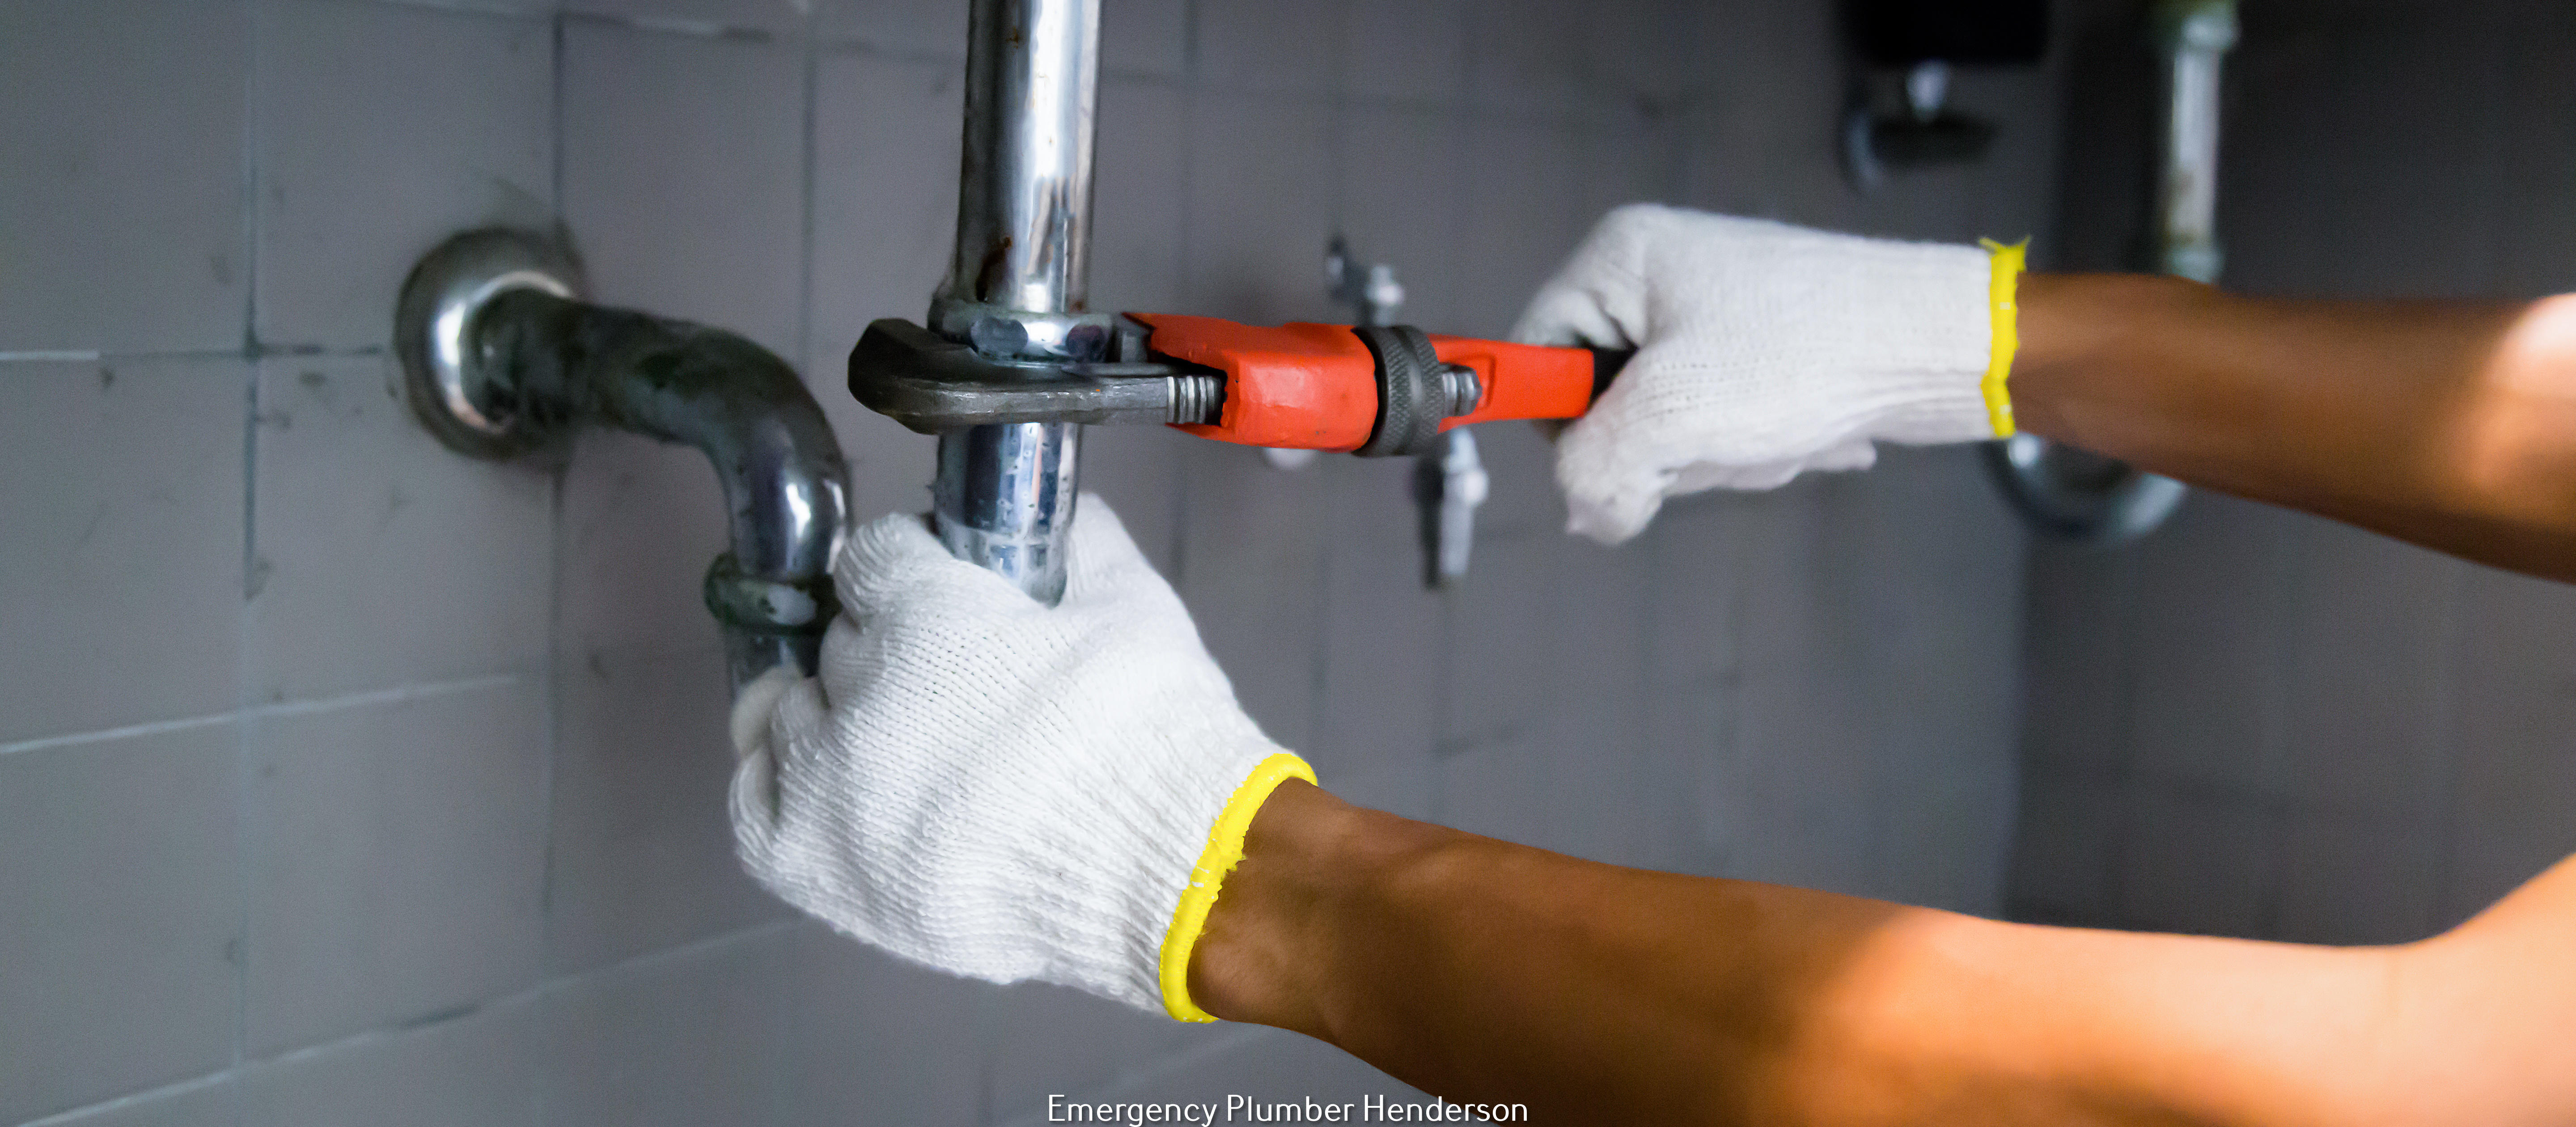 Stop Plumbing Problems in Their Tracks - Ferguson Home Services Delivers Round-the-Clock Emergency Plumbing Solutions